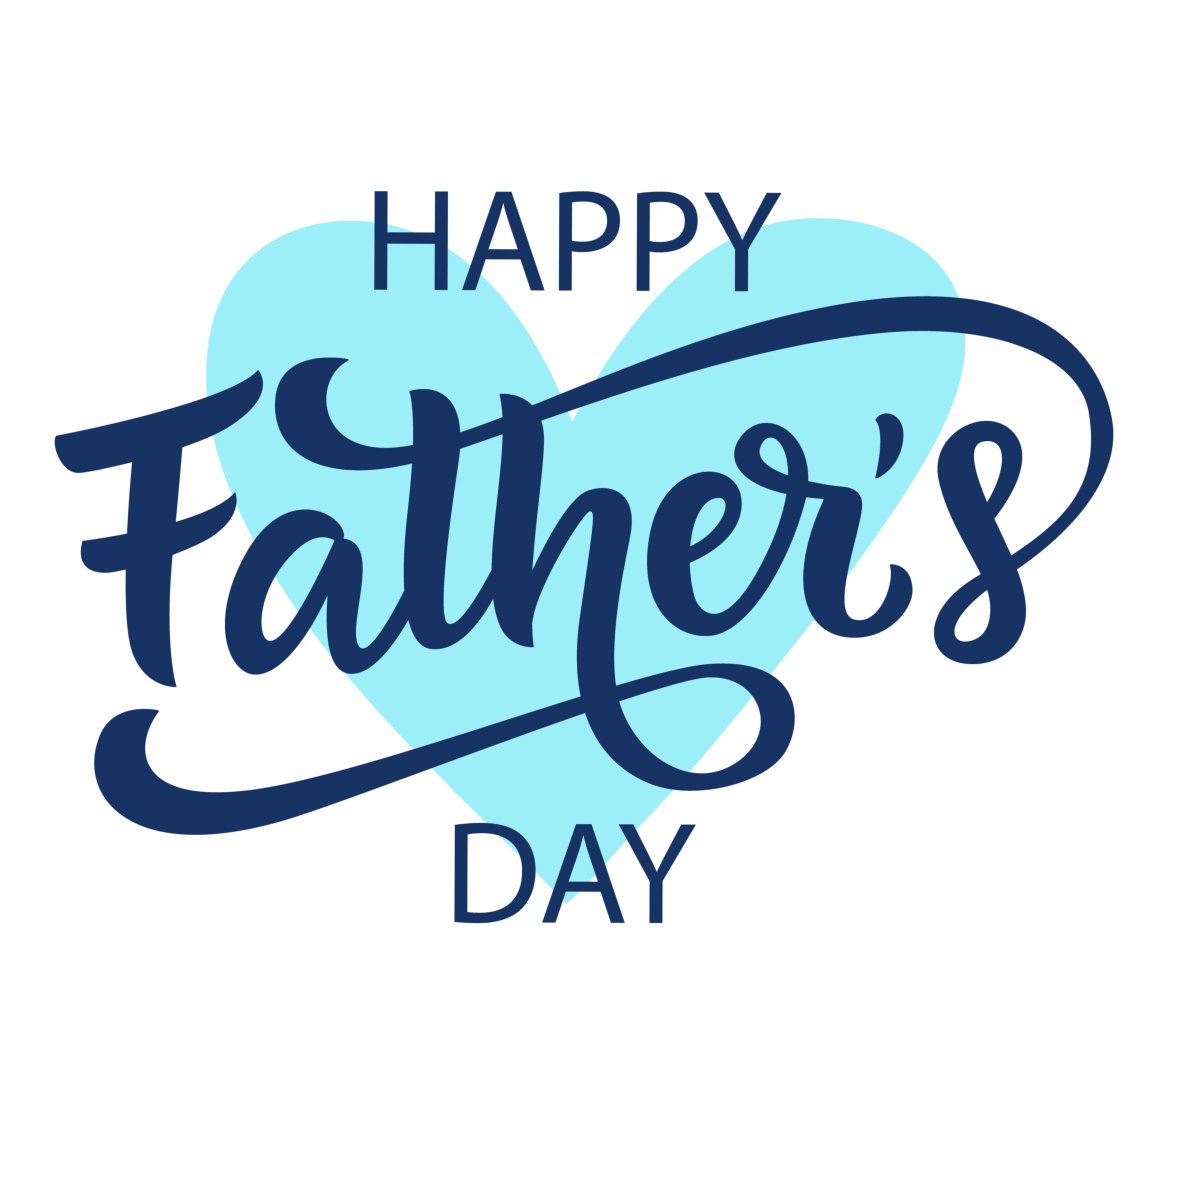 Father’s Day Celebration

This Sunday is a special day for our dads. For the sacrifices they made over the years to give us a good life, let us make this day filled with love and gratitude. Advanced Happy Father’s Day!

#MartinsvilleVA #PharmacyServices #HappyFathersDay